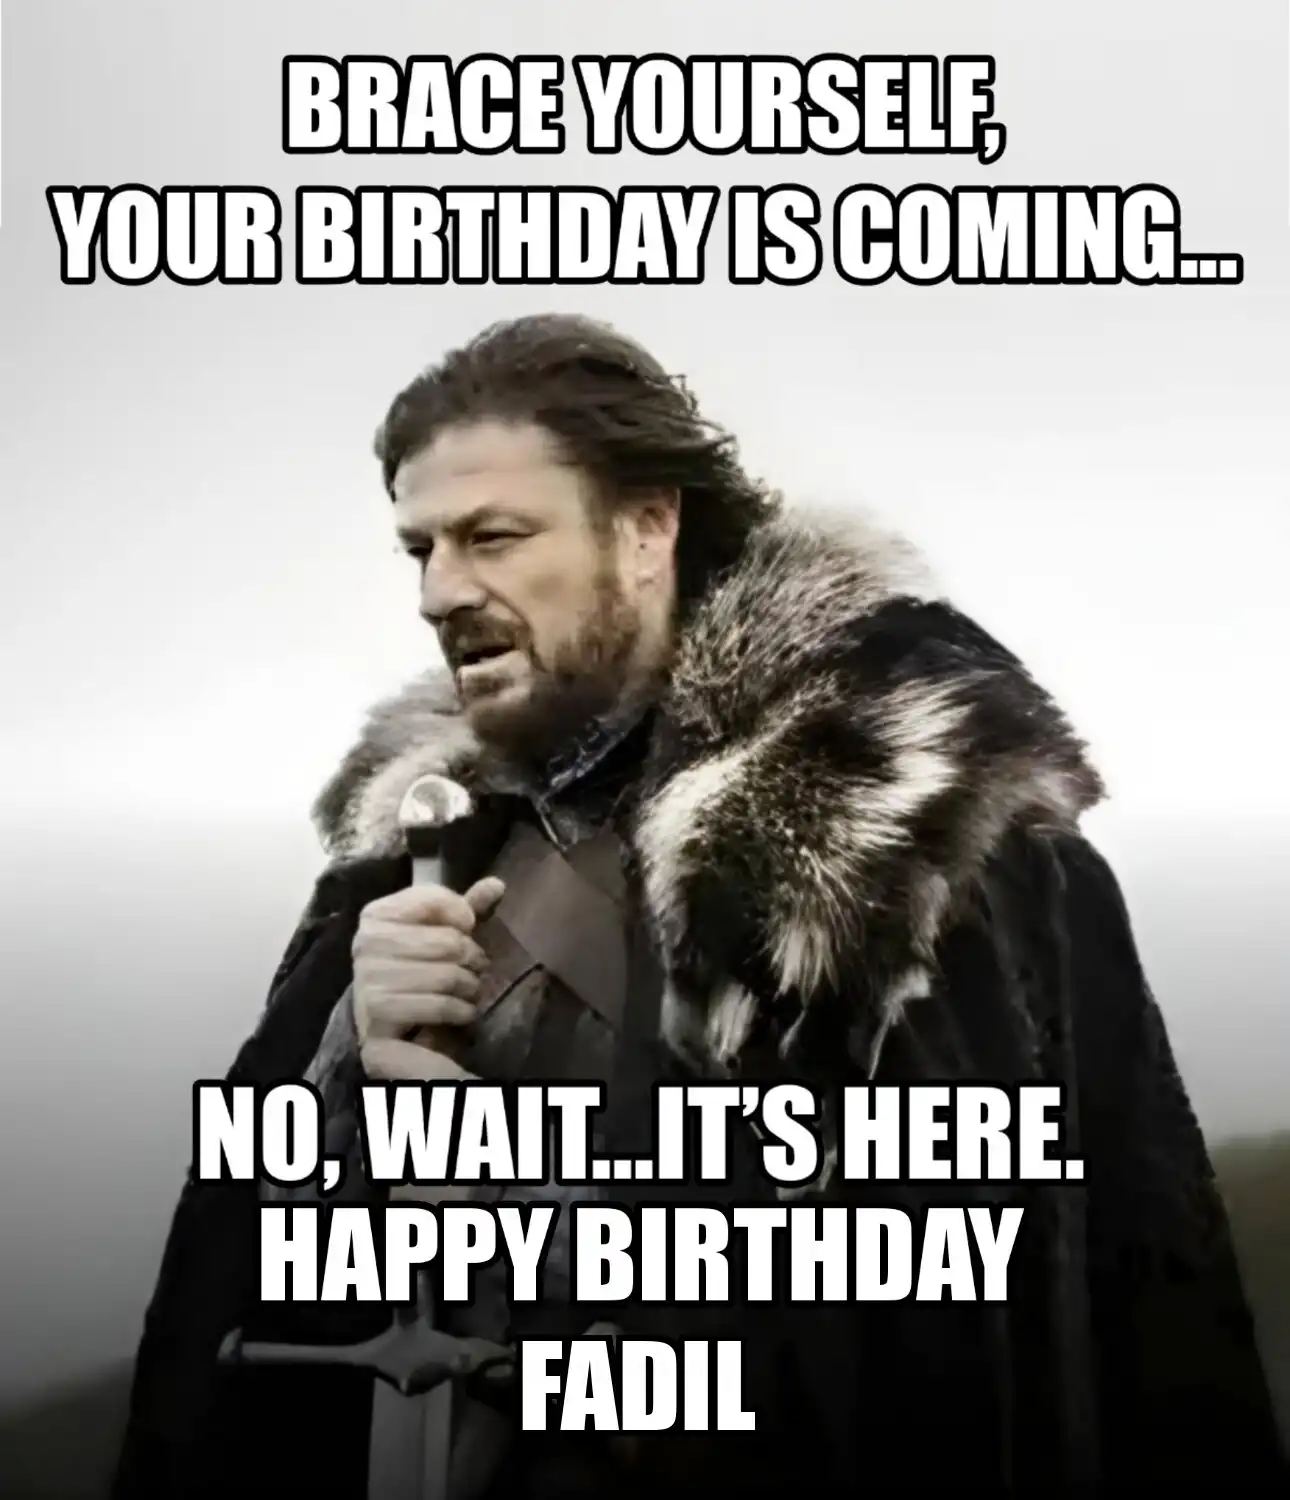 Happy Birthday Fadil Brace Yourself Your Birthday Is Coming Meme